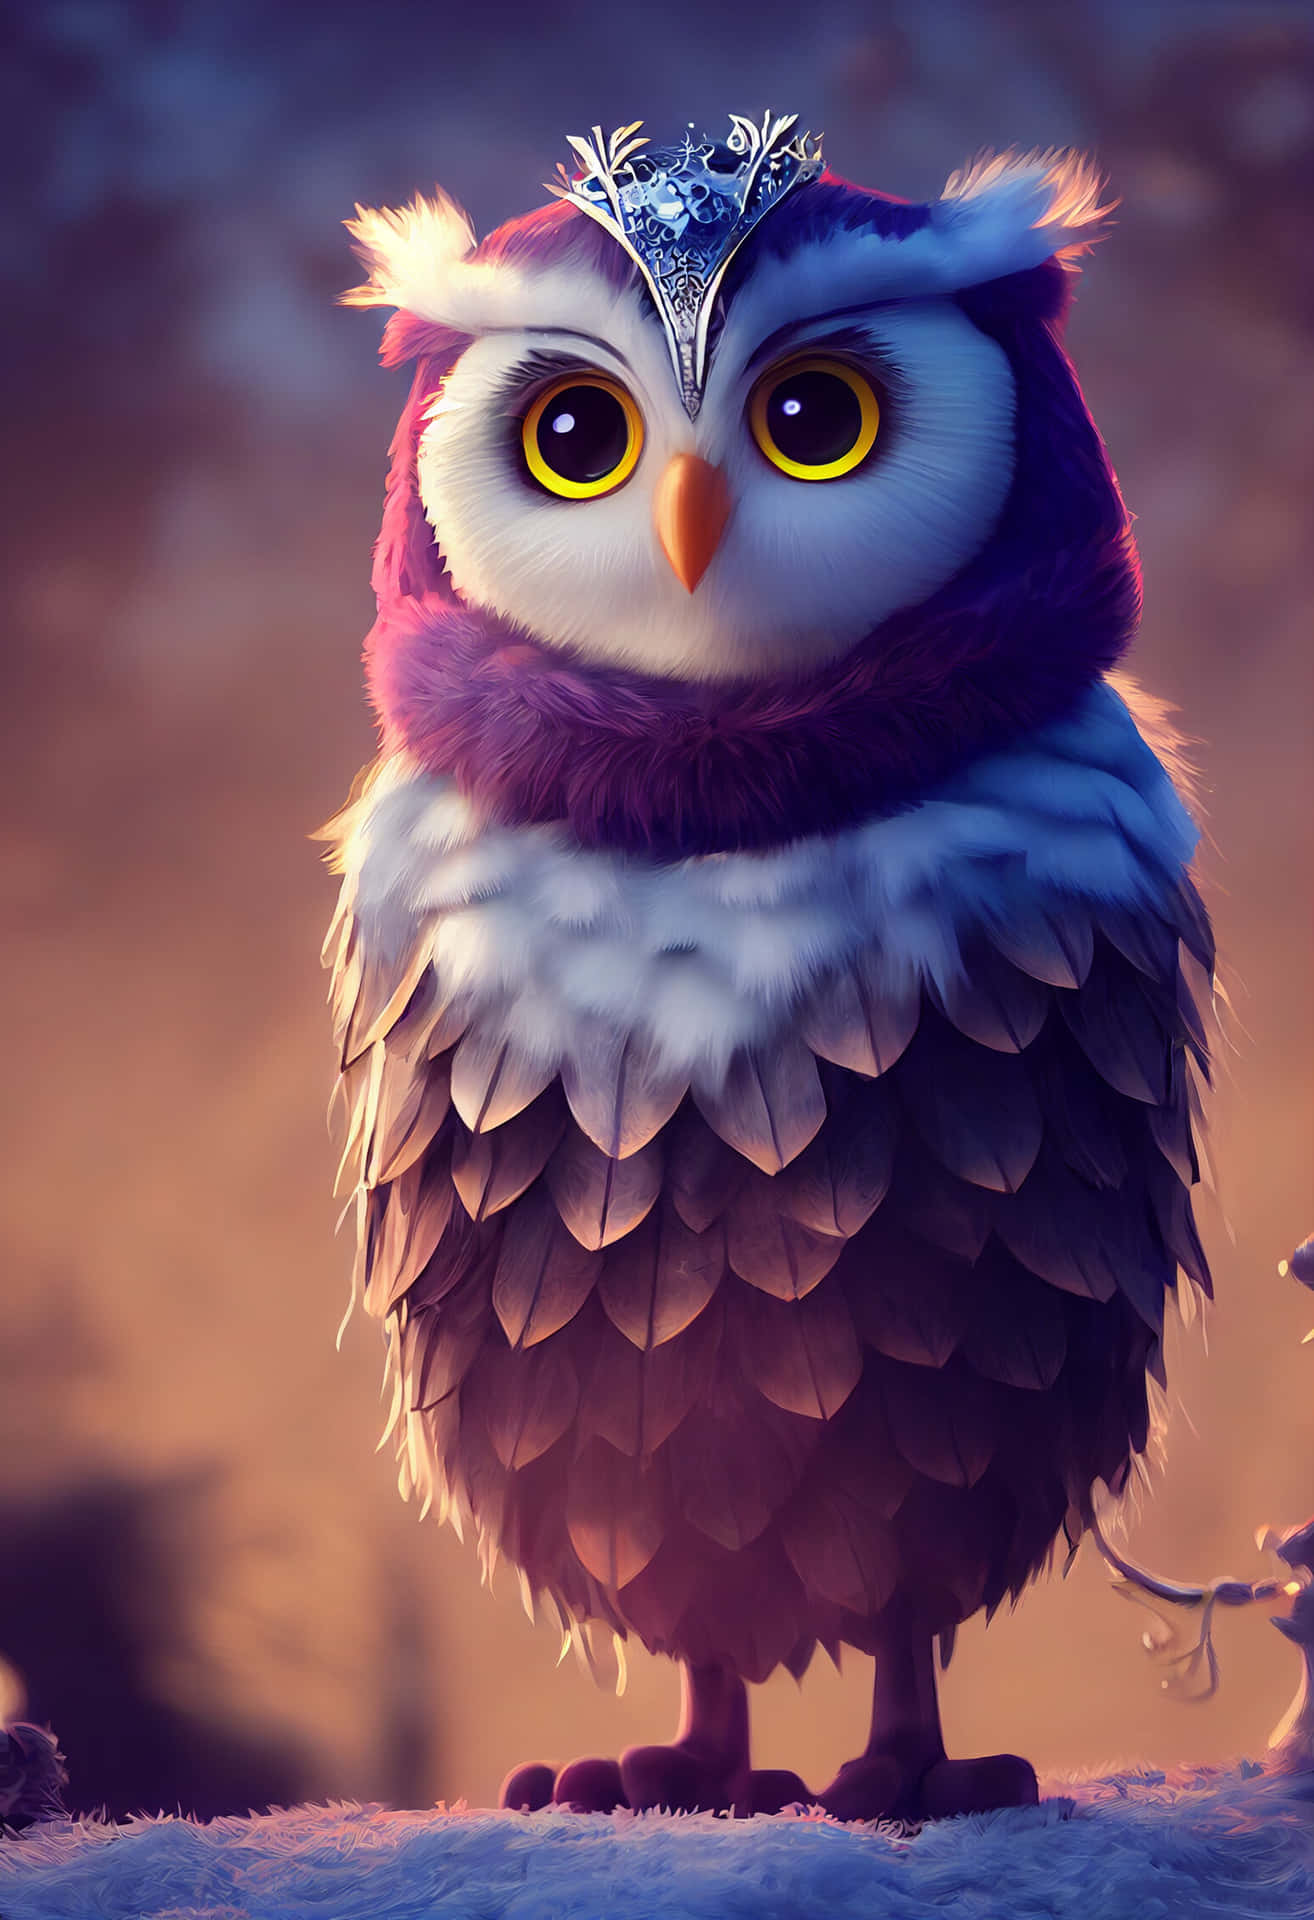 "This Wise Owl Knows How to Make You Smile"